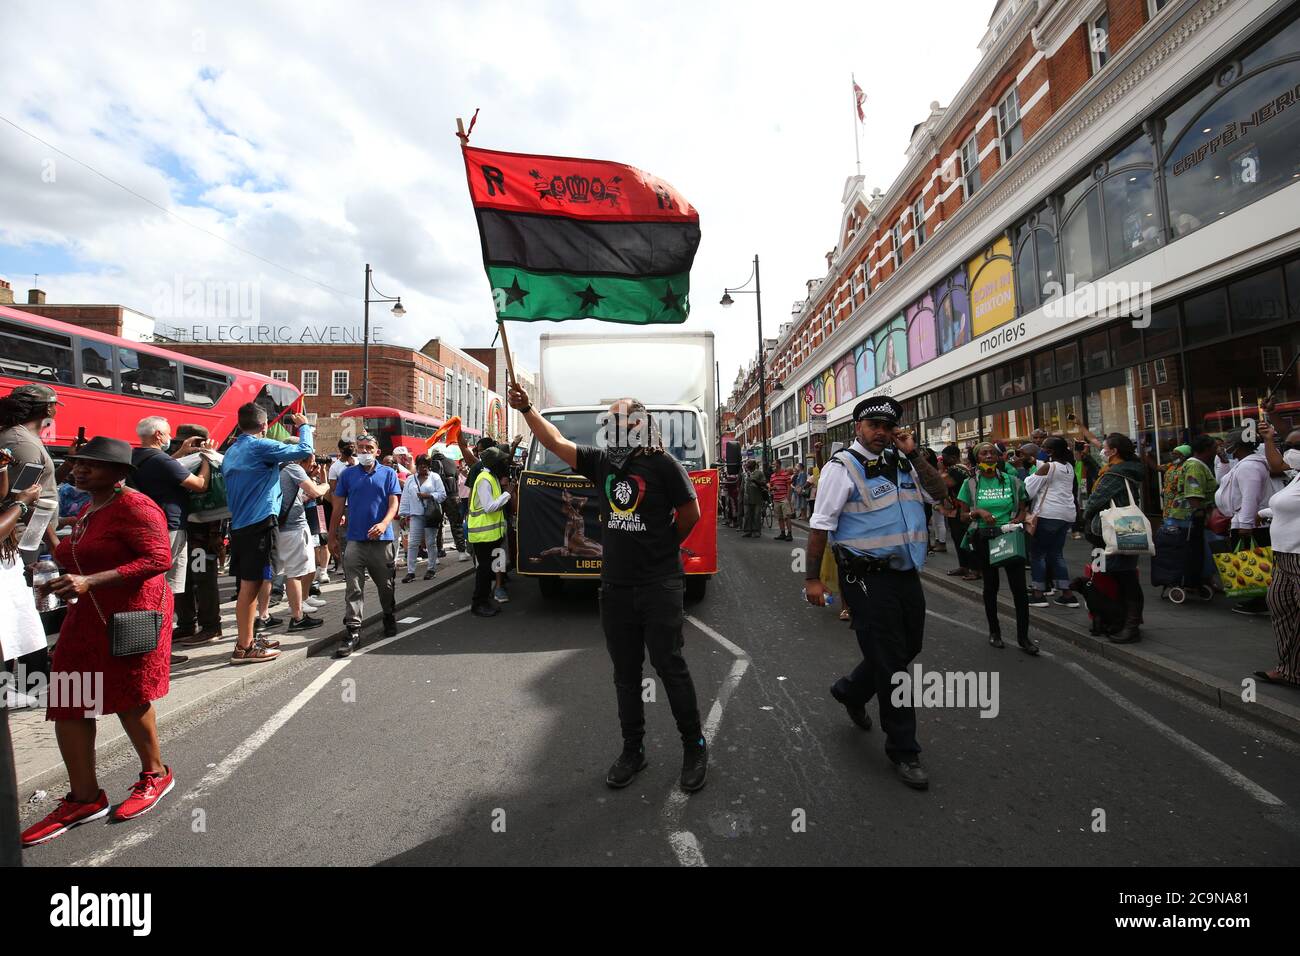 Protesters supporting the Stop the Maangamizi Campaign and the Afrikan Emancipation Day Reparations March Committee take part in a march from Windrush Square to Max Roach Park in Brixton, London. A curfew and other restrictions were imposed on demonstrations planned in south London to stop people blocking main roads or planning illegal music events, Scotland Yard has said. Stock Photo